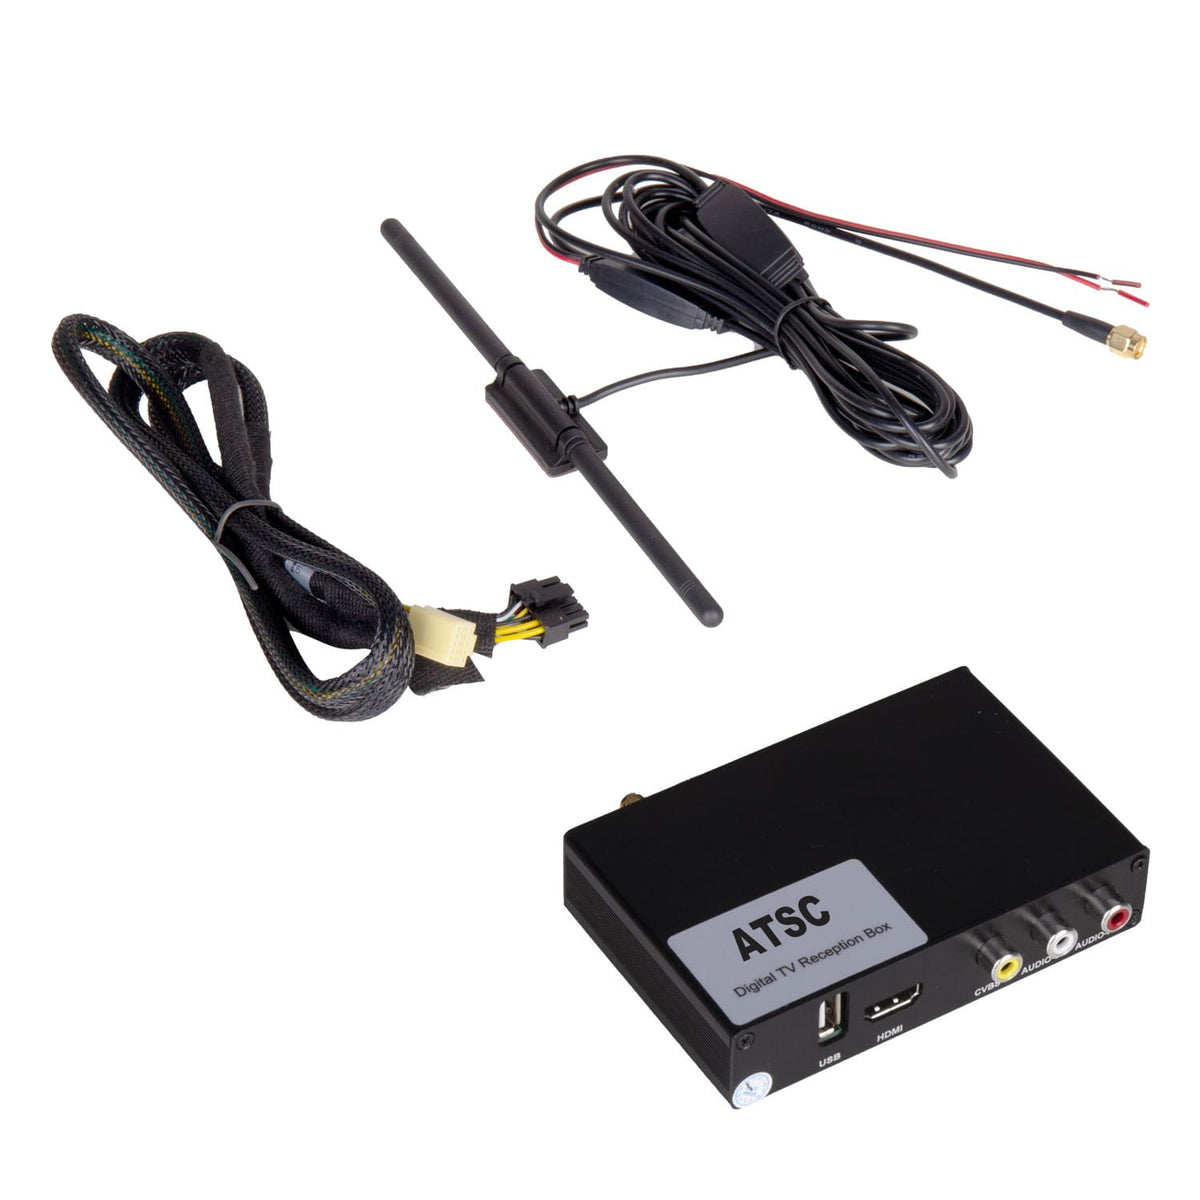 HDTV Car DVB-T2 DVB-T MULTI PLP Digital TV Receiver automobile DTV box With  Two Tuner Antenna on sale